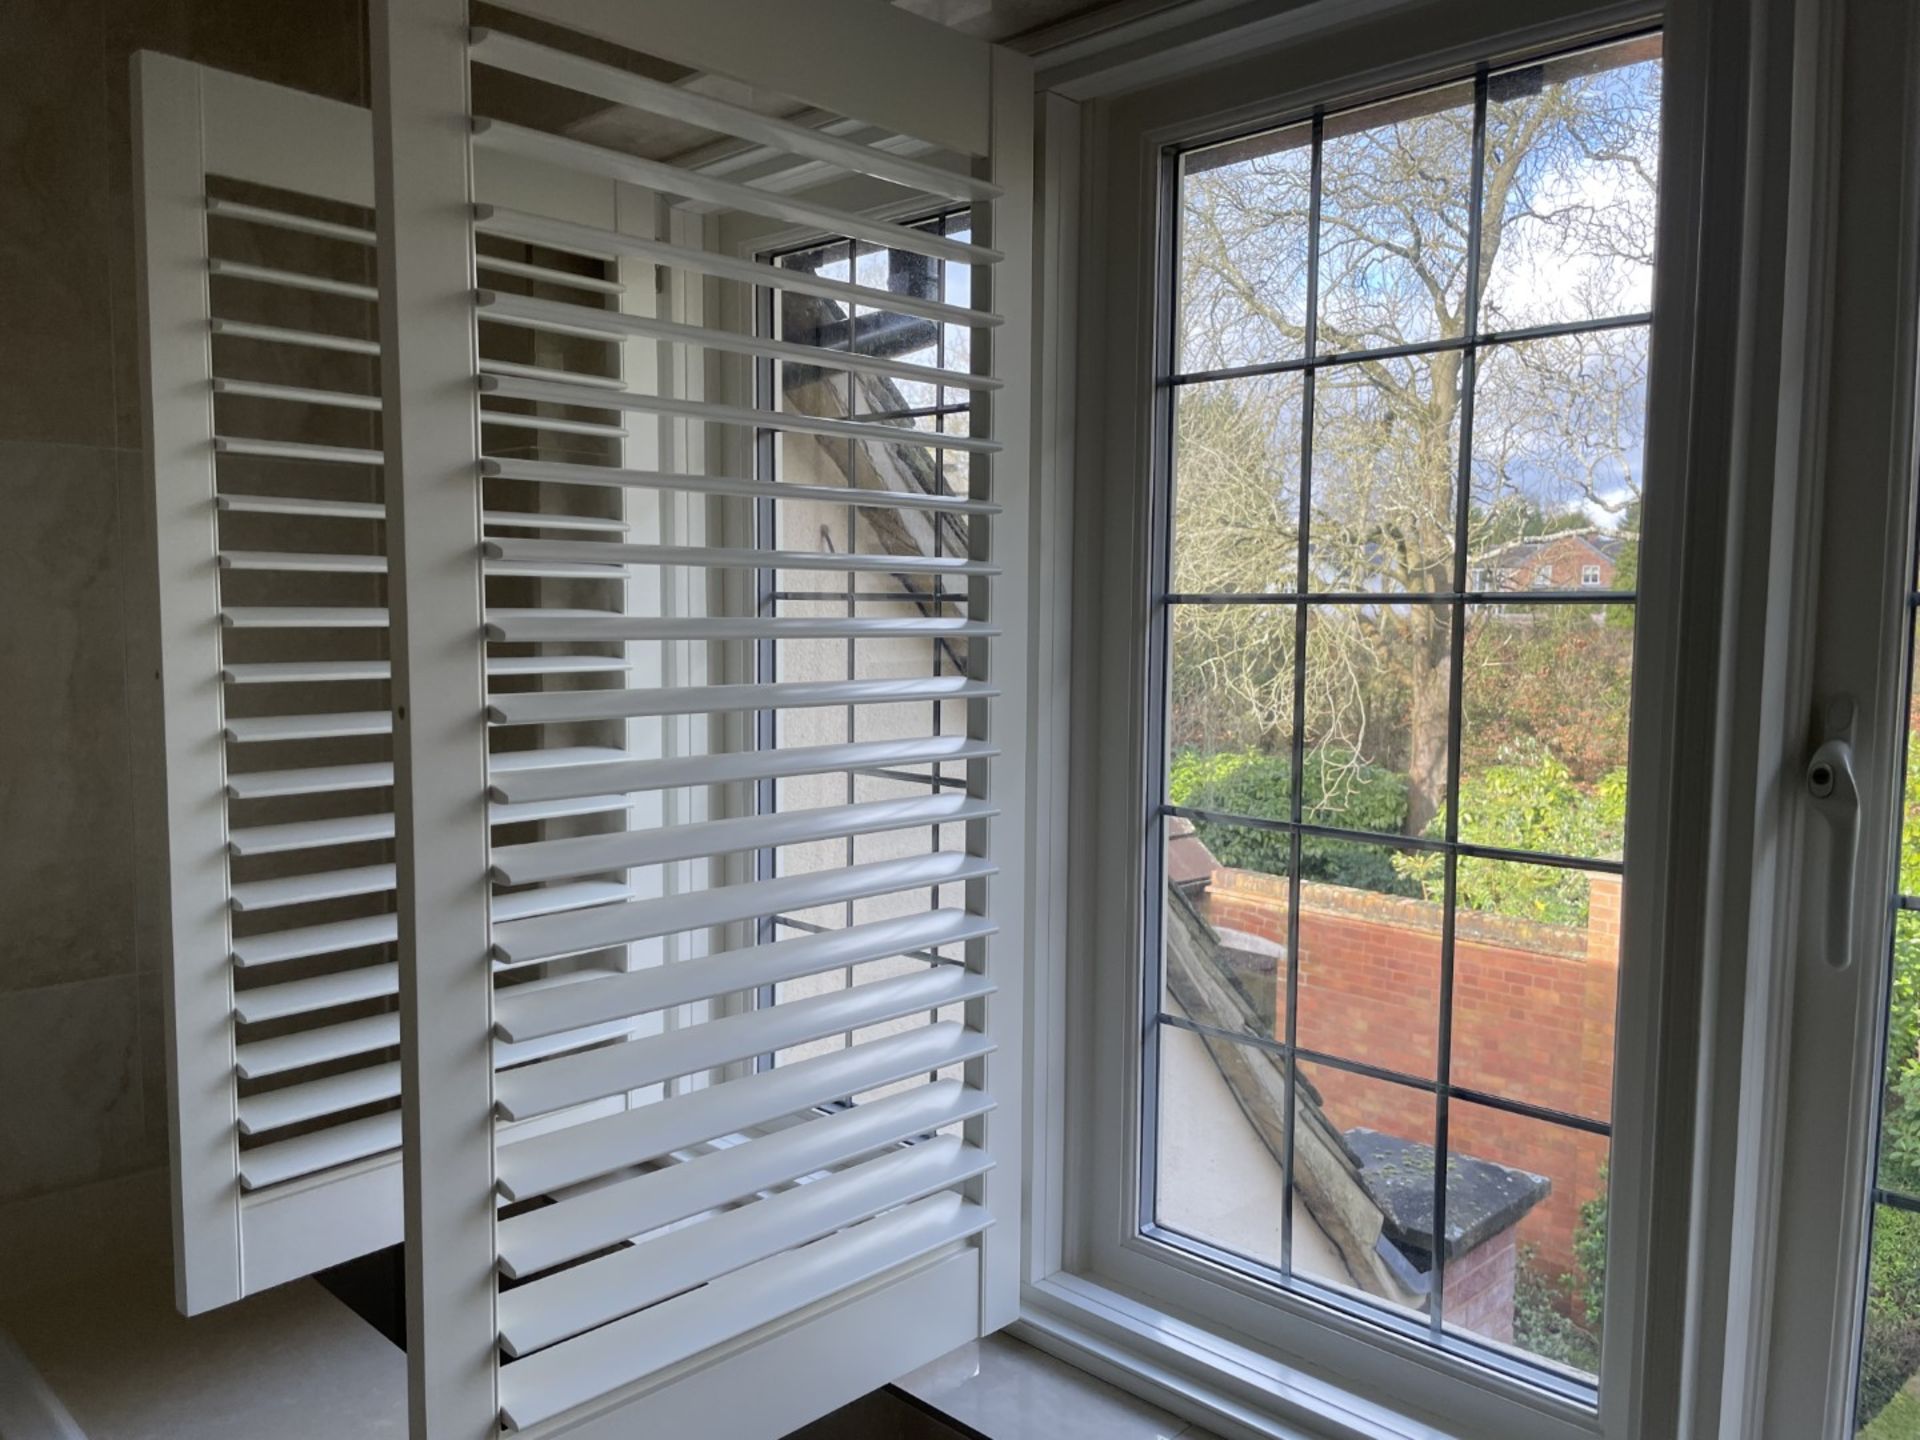 1 x Hardwood Timber Double Glazed Leaded 3-Pane Window Frame fitted with Shutter Blinds - Image 2 of 15